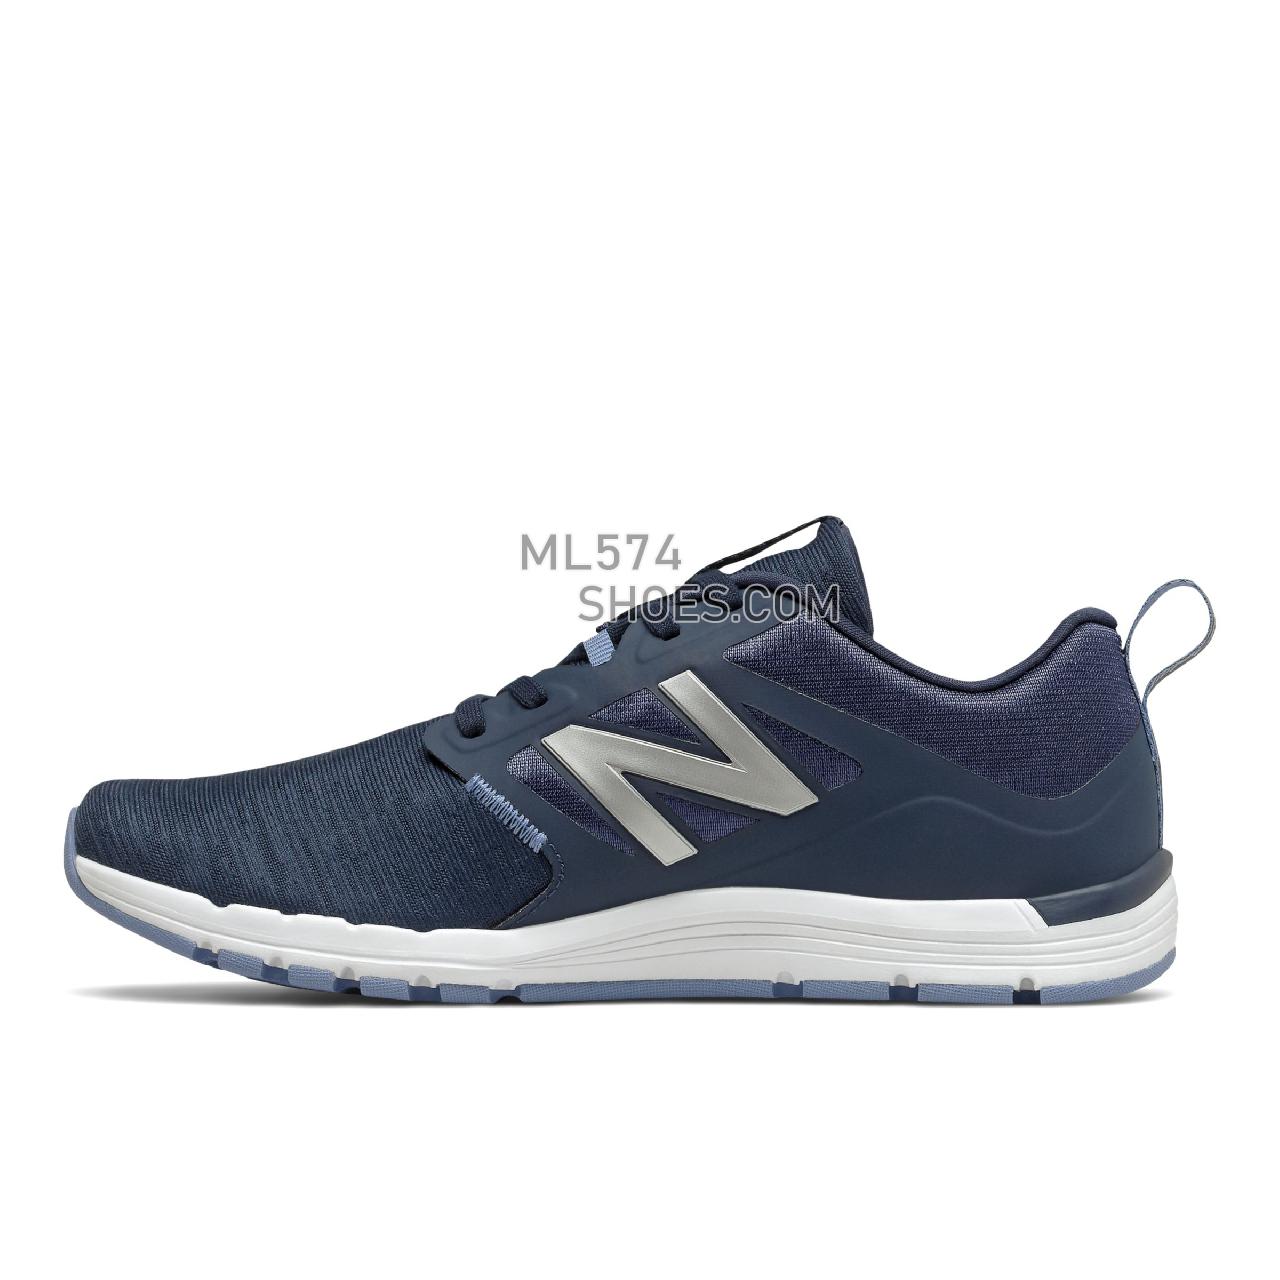 New Balance 577v5 - Women's Workout - Navy with Silver - WX577CN5